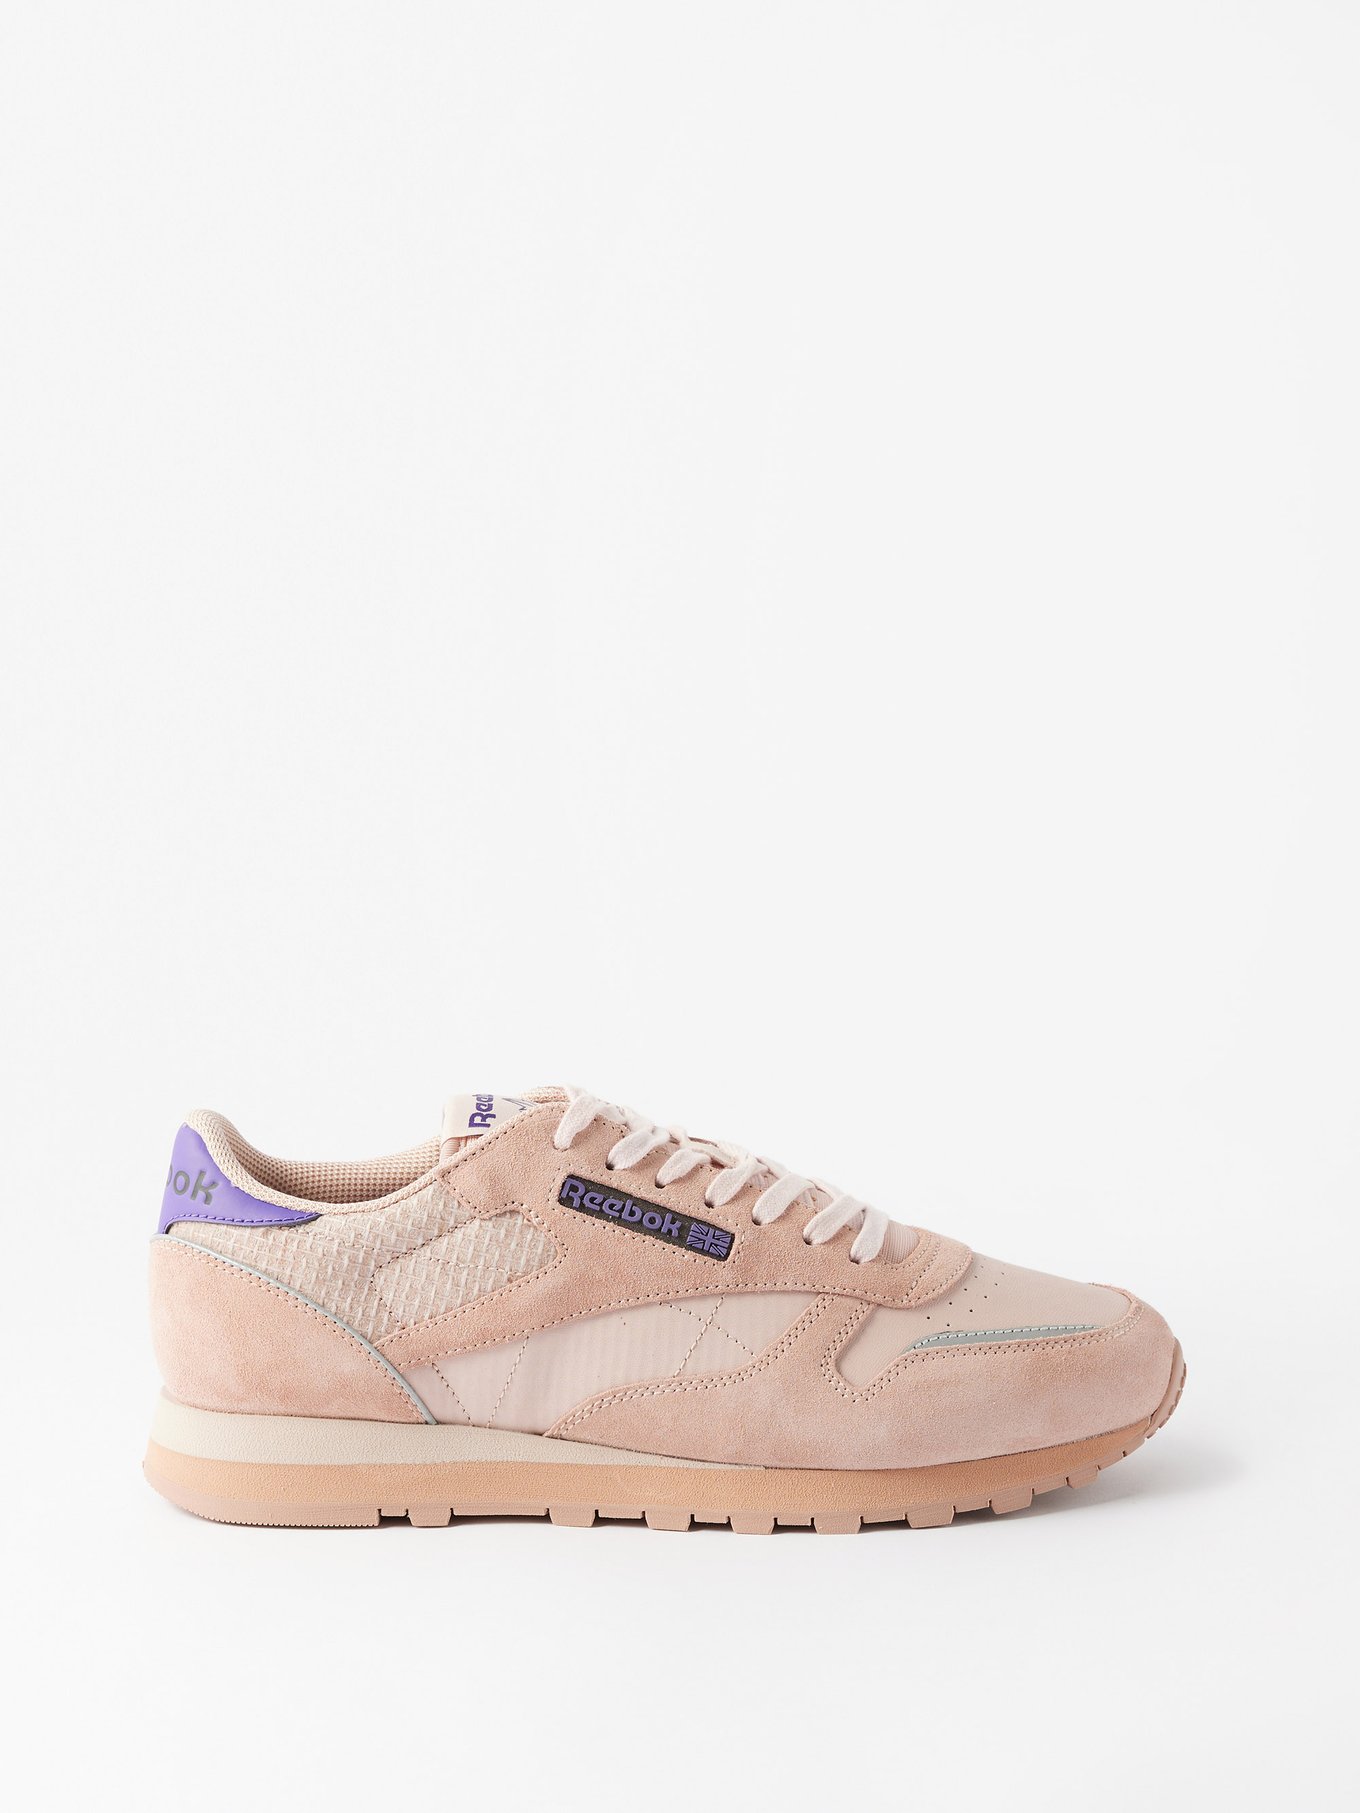 Pink Classic suede, mesh leather Reebok | MATCHESFASHION US